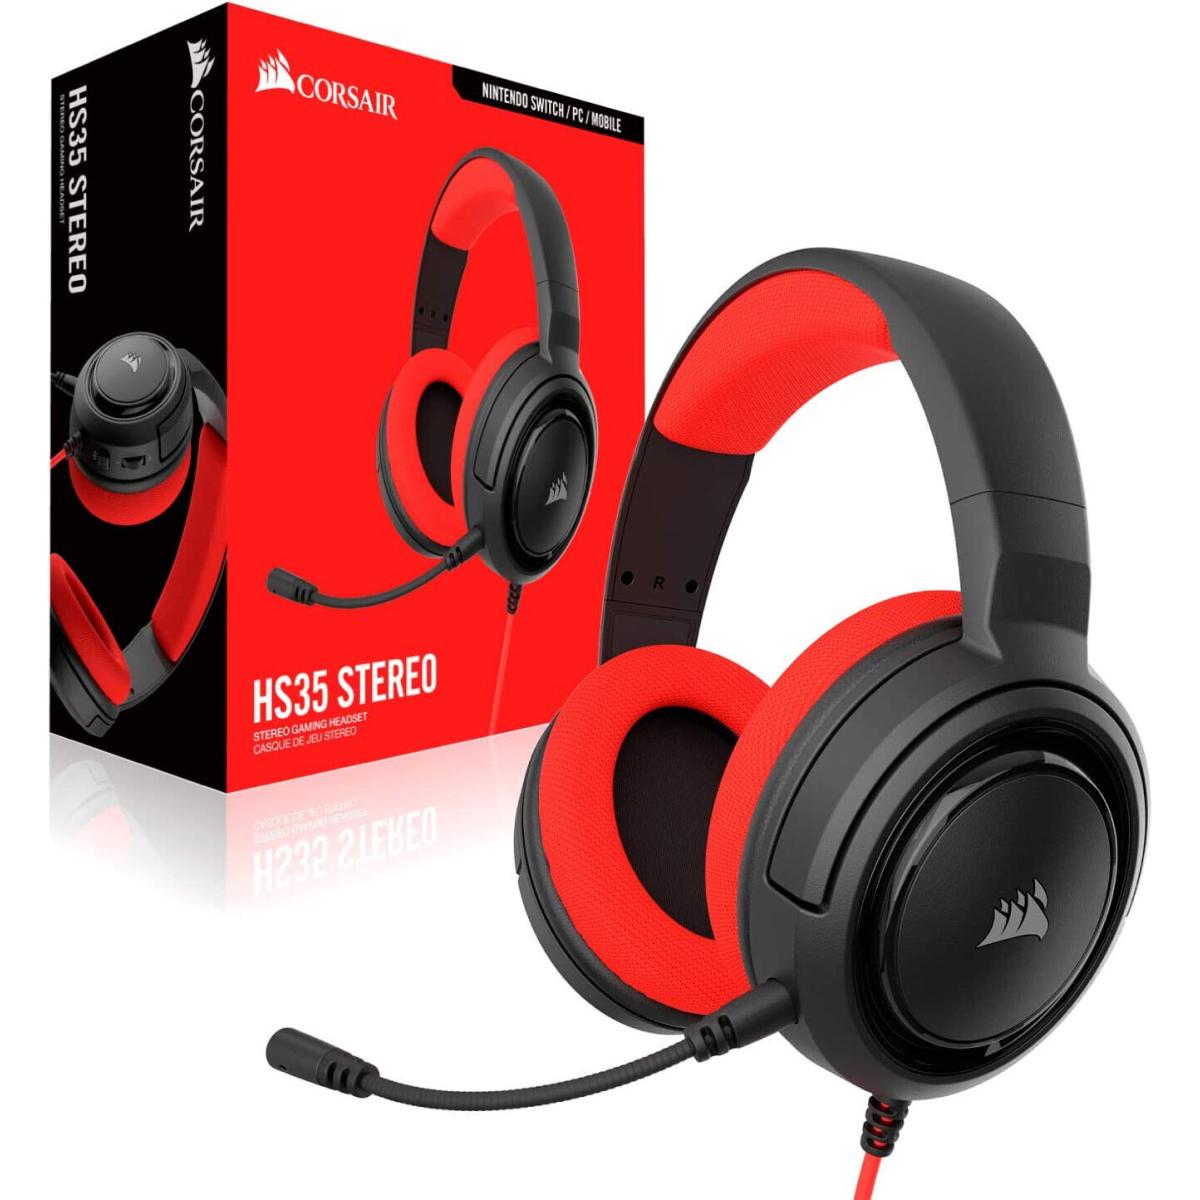 Corsair HS35 (Red) Wired Gaming Headset, 3.5mm Stereo Sound, Compatible With 360° Spatial Surround Sound On Windows, Memory Foam Earcups, Noise Cancelling Detachable Mic-For PC, Mac, Xbox, PS4, Mobile